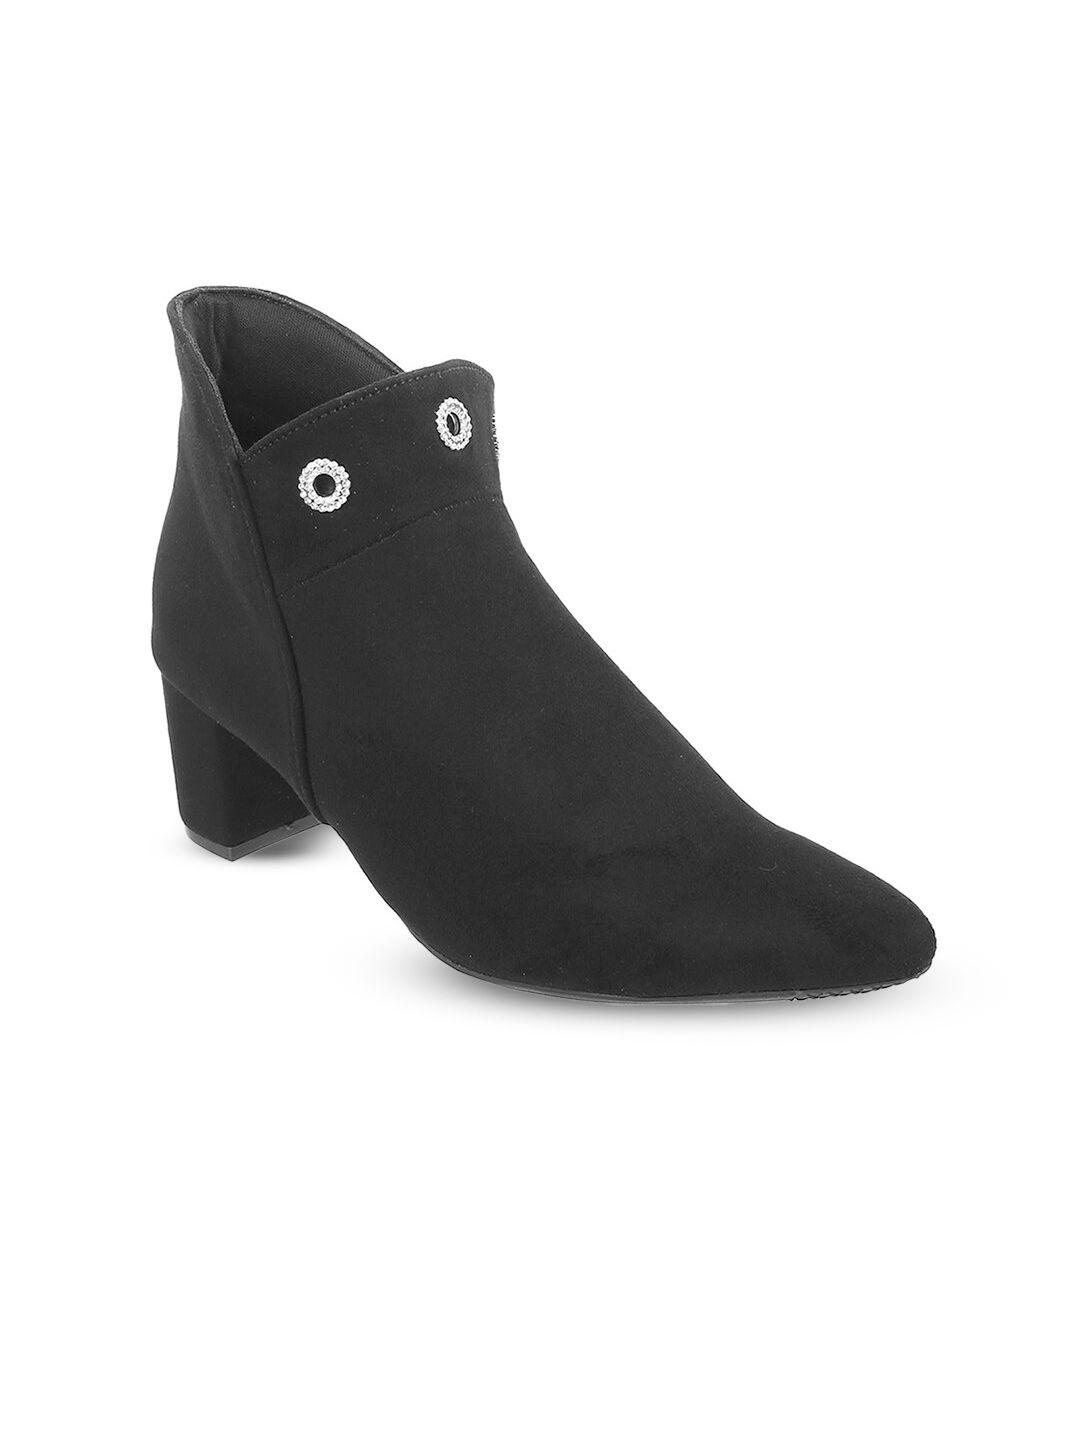 mochi pointed toe mid top blocked heeled boots